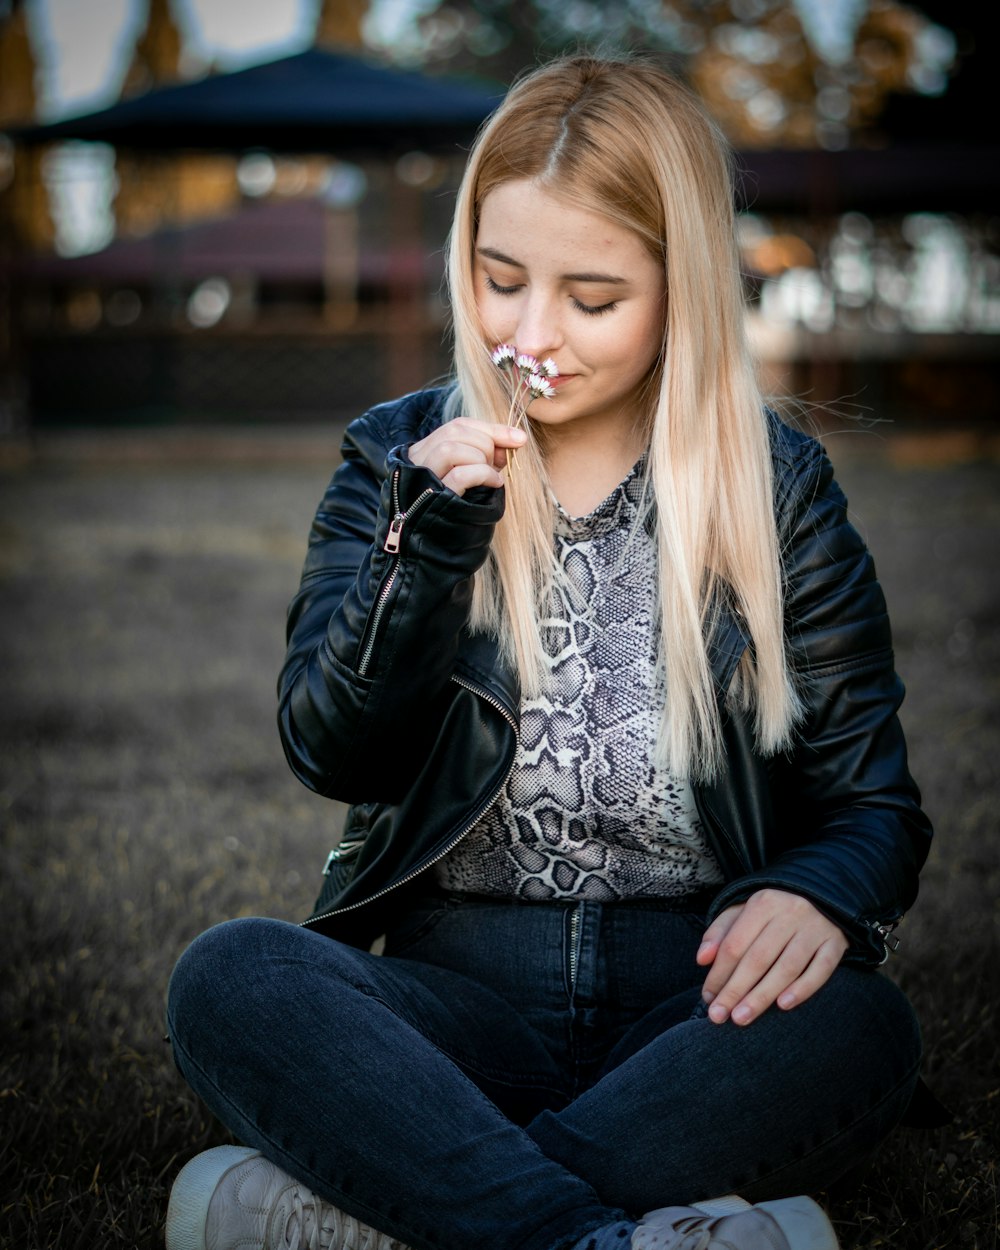 woman in black leather jacket and blue denim jeans sitting on ground